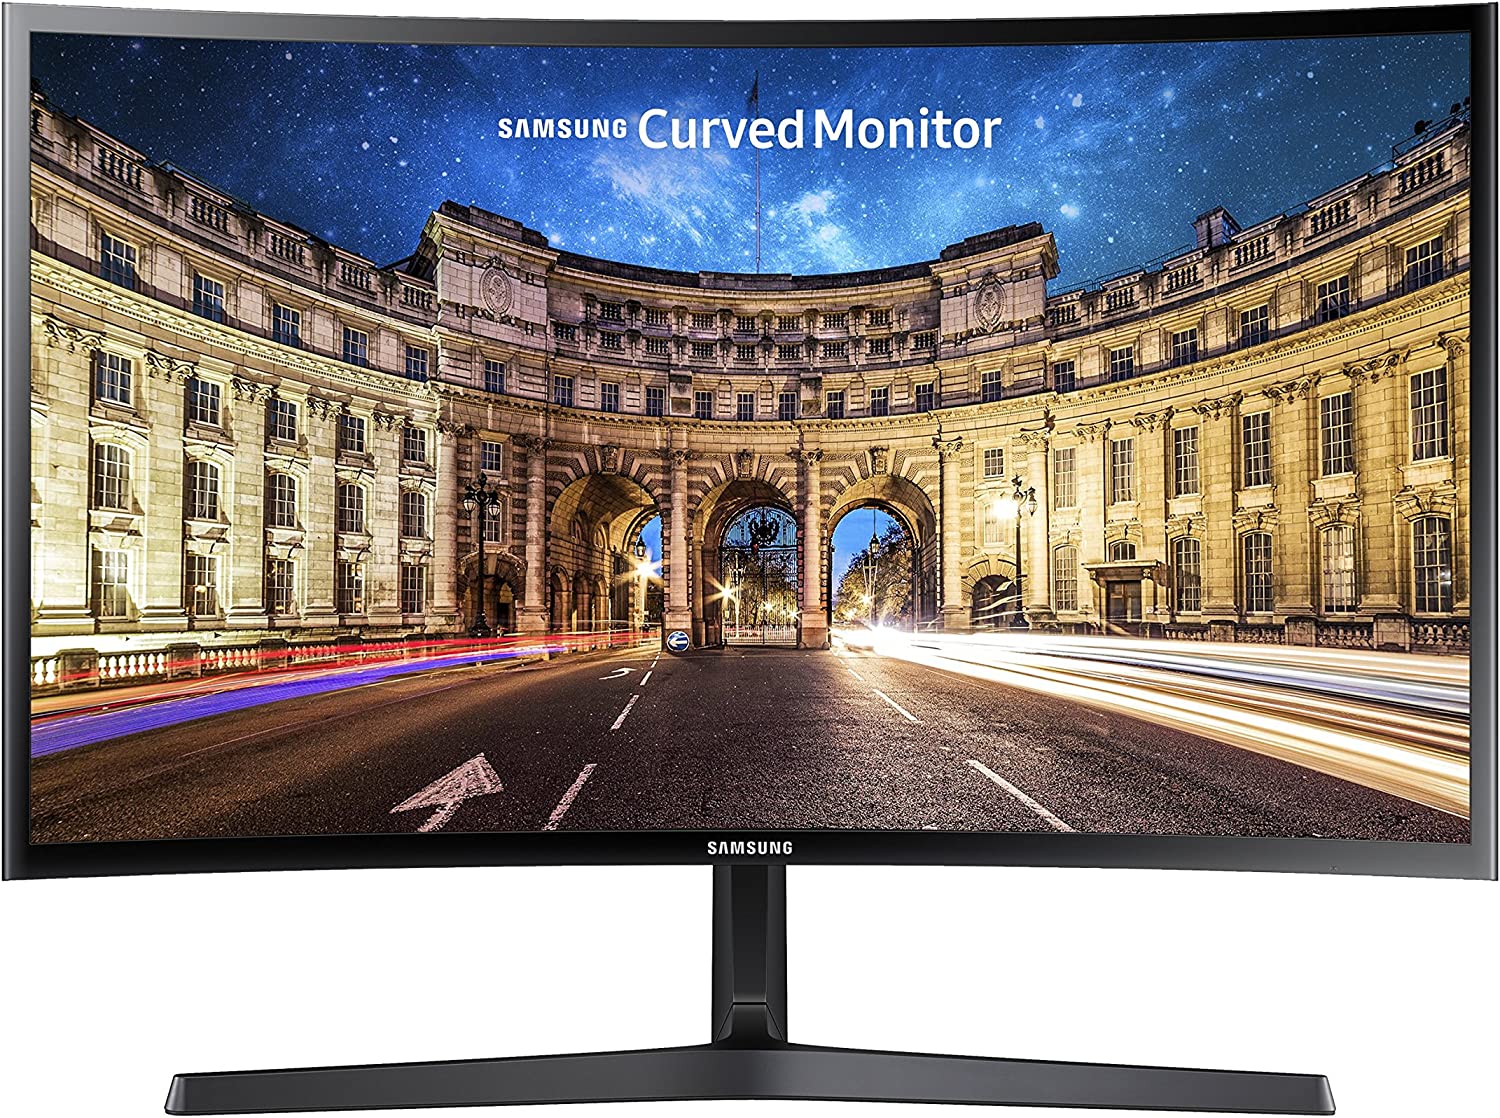 Samsung 27-inch curved LED monitor